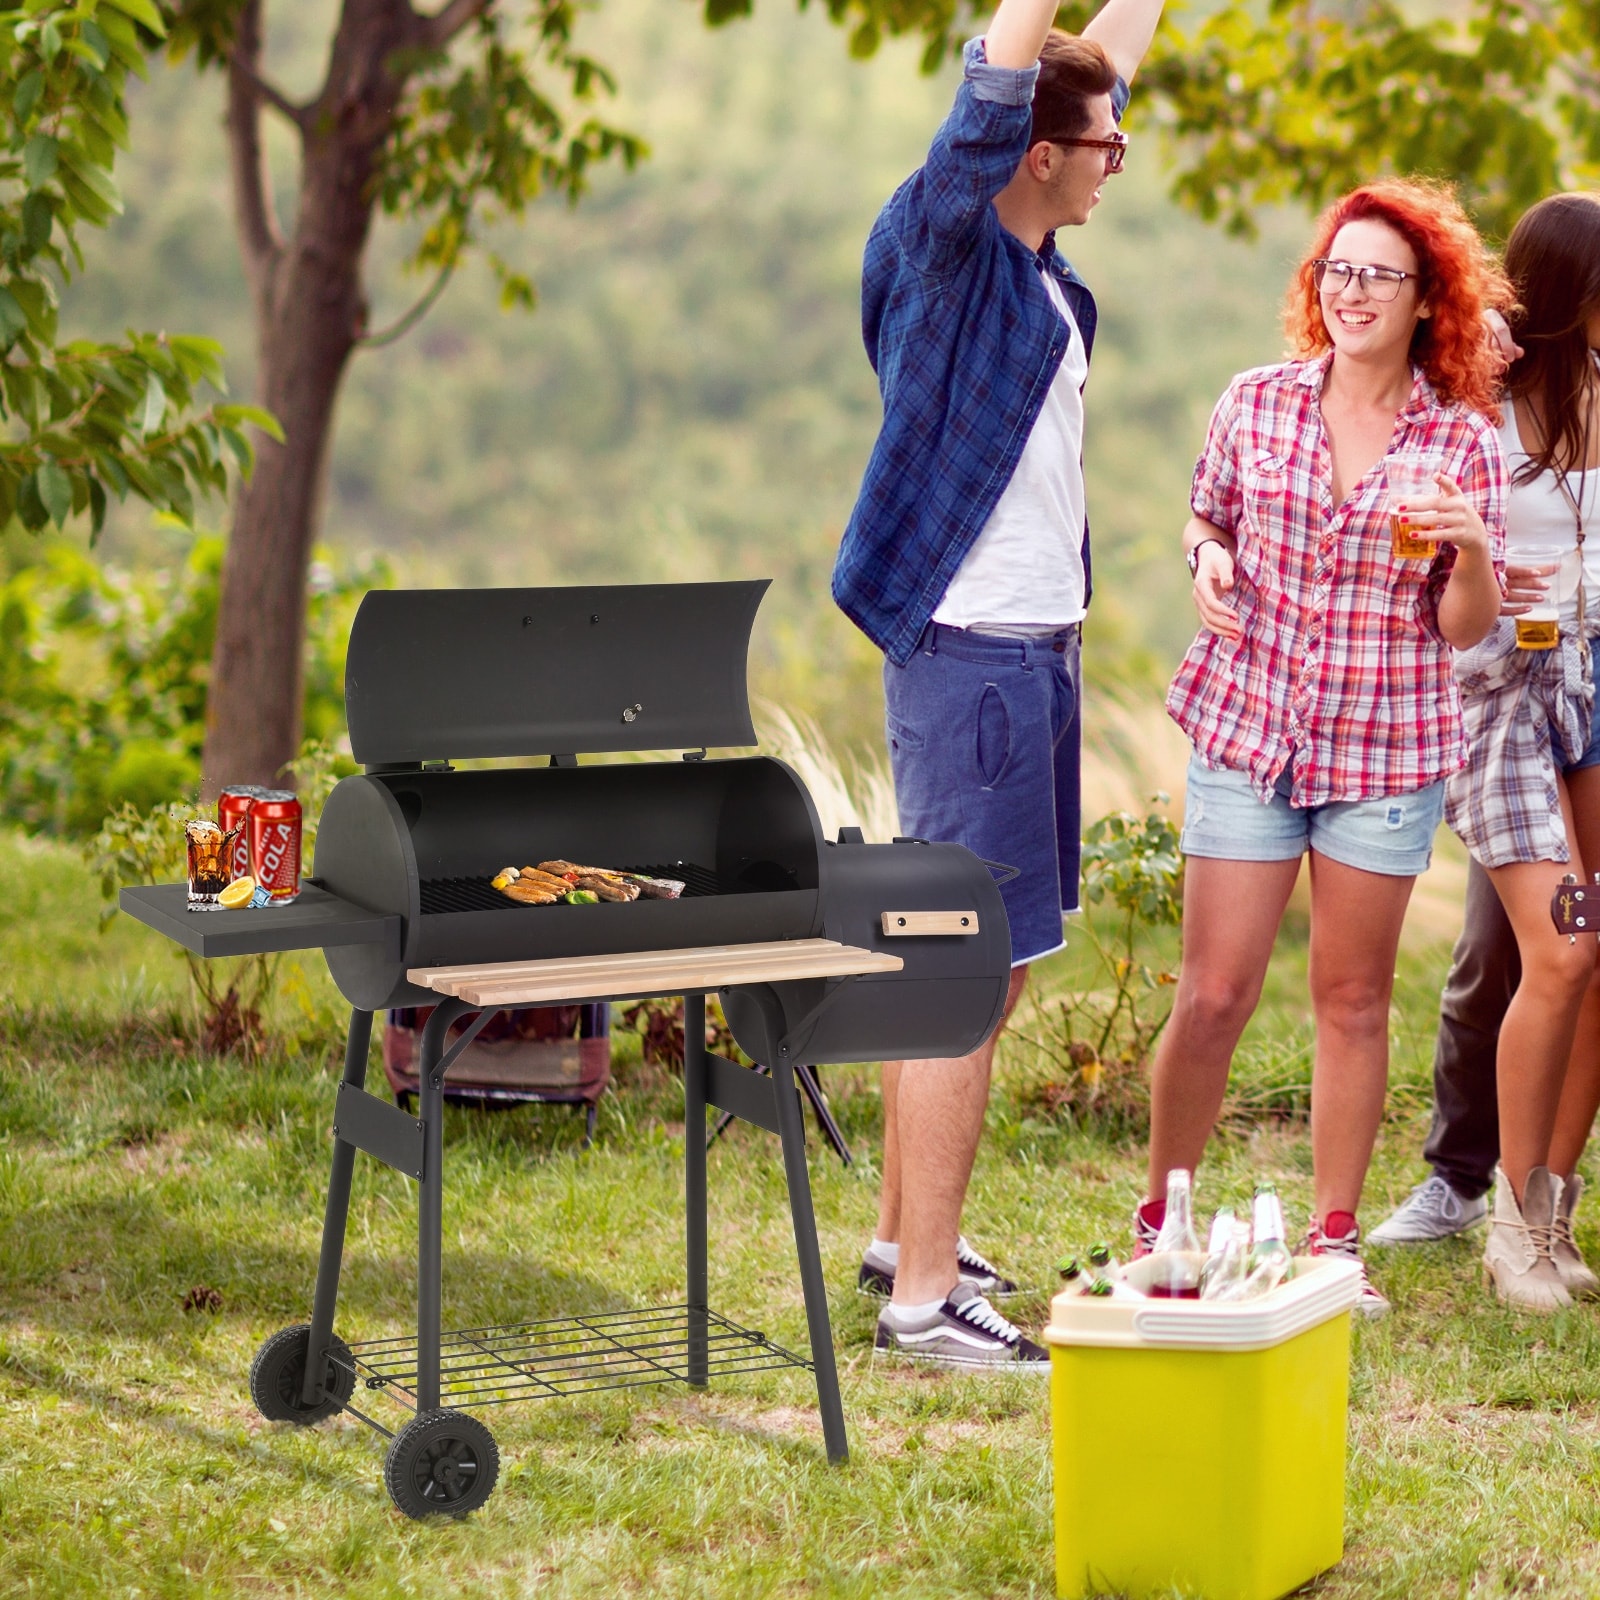 Purper knop stroomkring Outsunny Steel Portable Backyard Charcoal BBQ Grill and Offset Smoker - N/A  - Overstock - 27989469